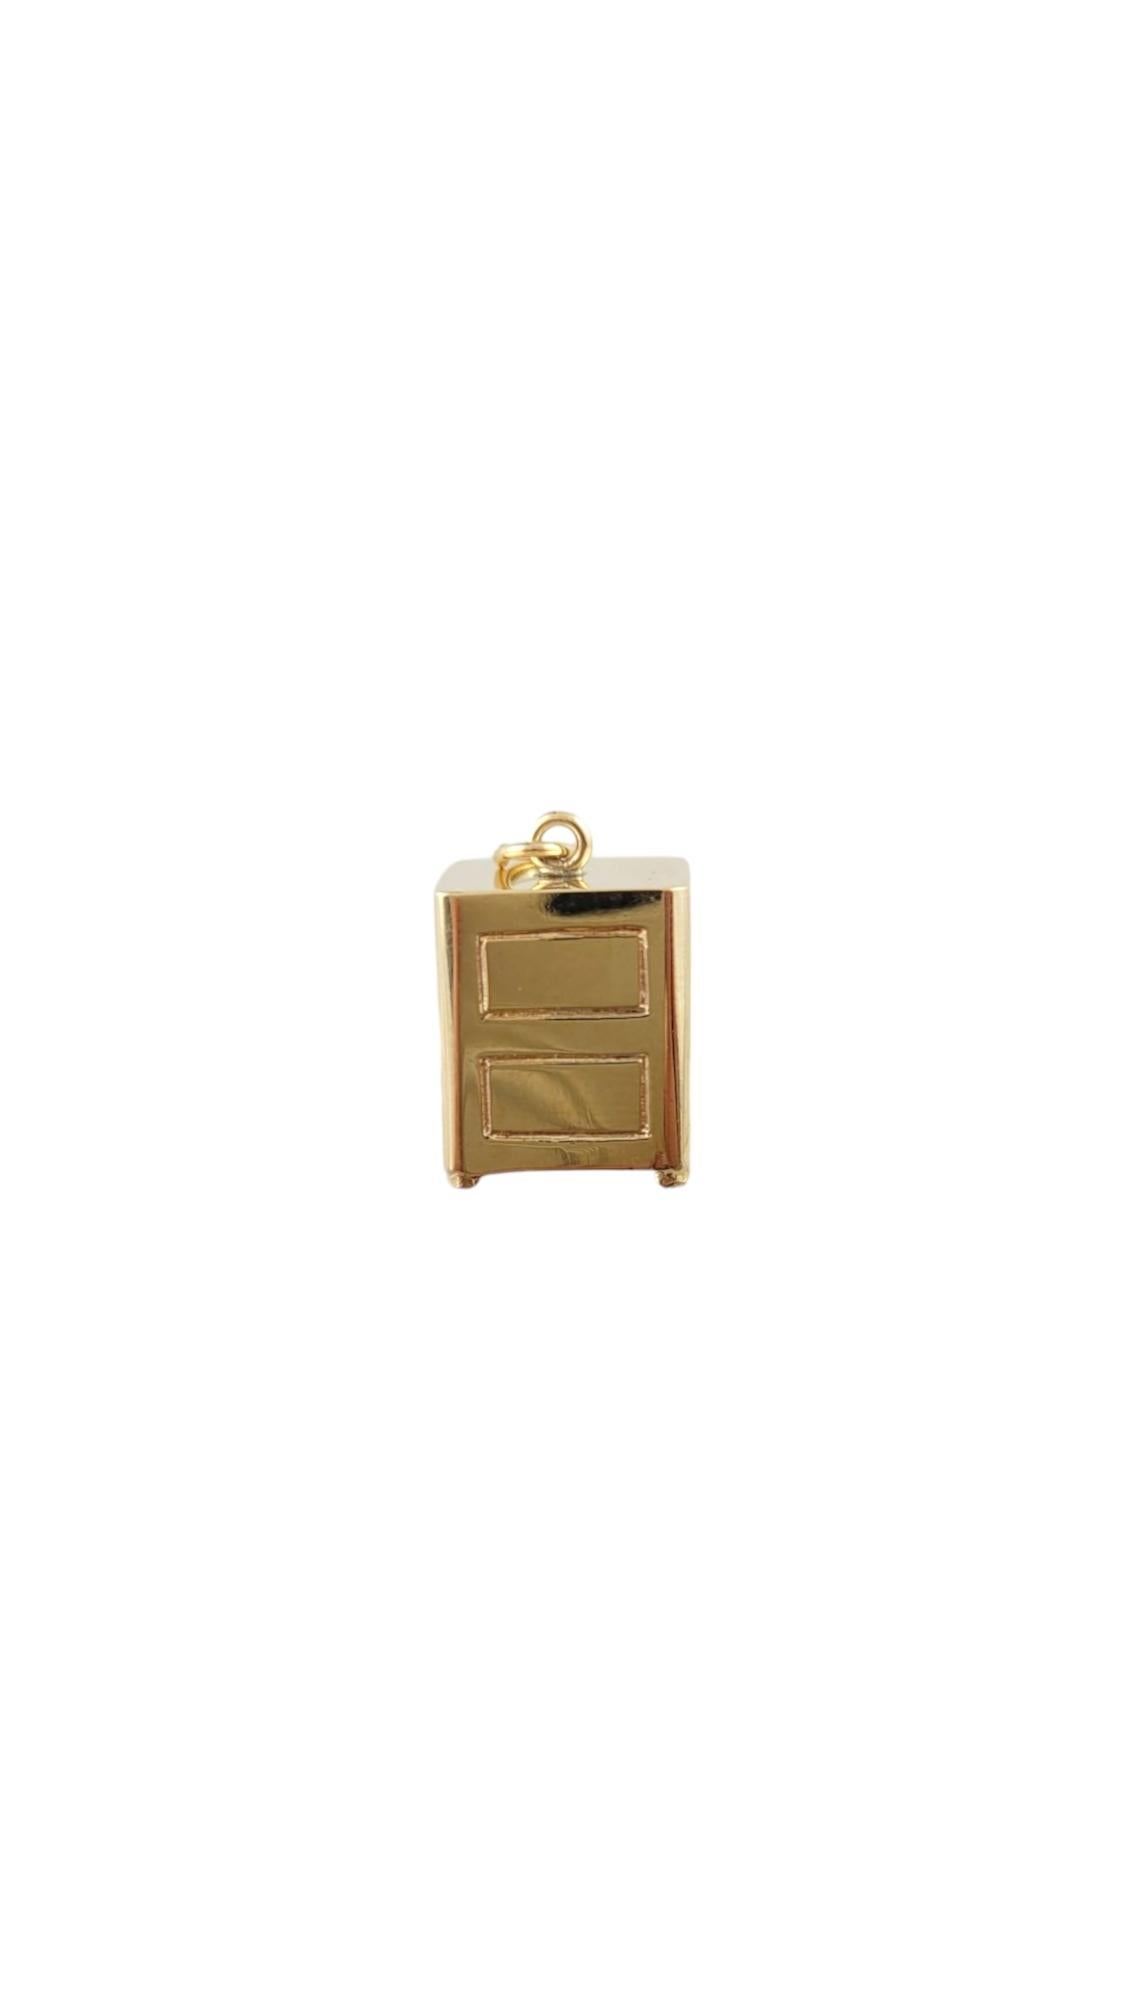 14K Yellow Gold Articulating Safe Charm #16790 For Sale 1